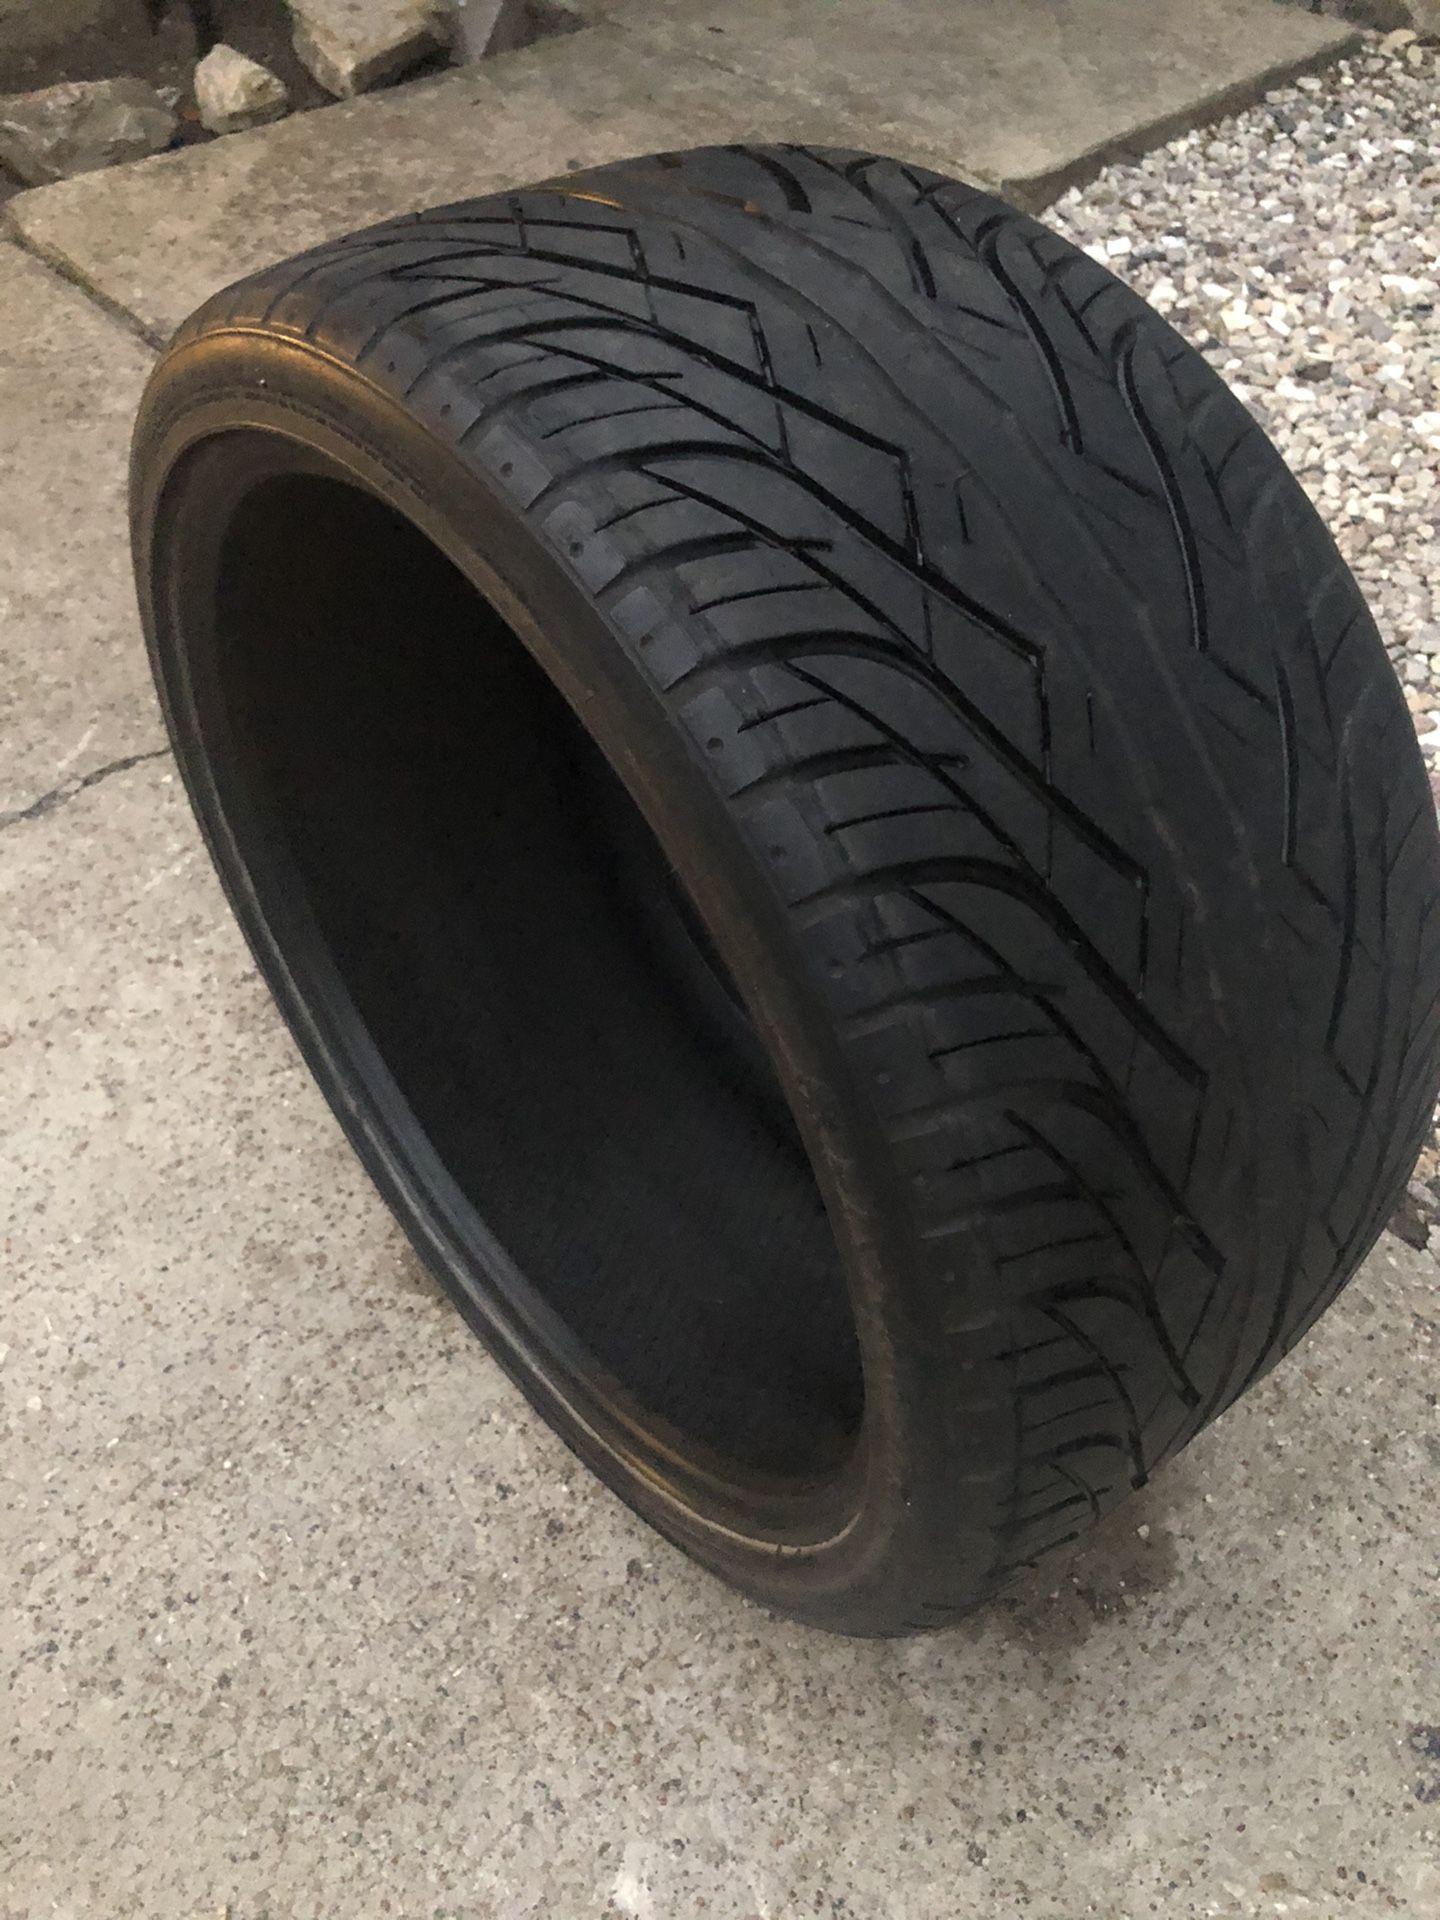 (Great Condition) Lionhart LH-FIVE 285/30R20 XL High Performance Tire (No Holes,No Patches,No Plugs) 50$ Firm 